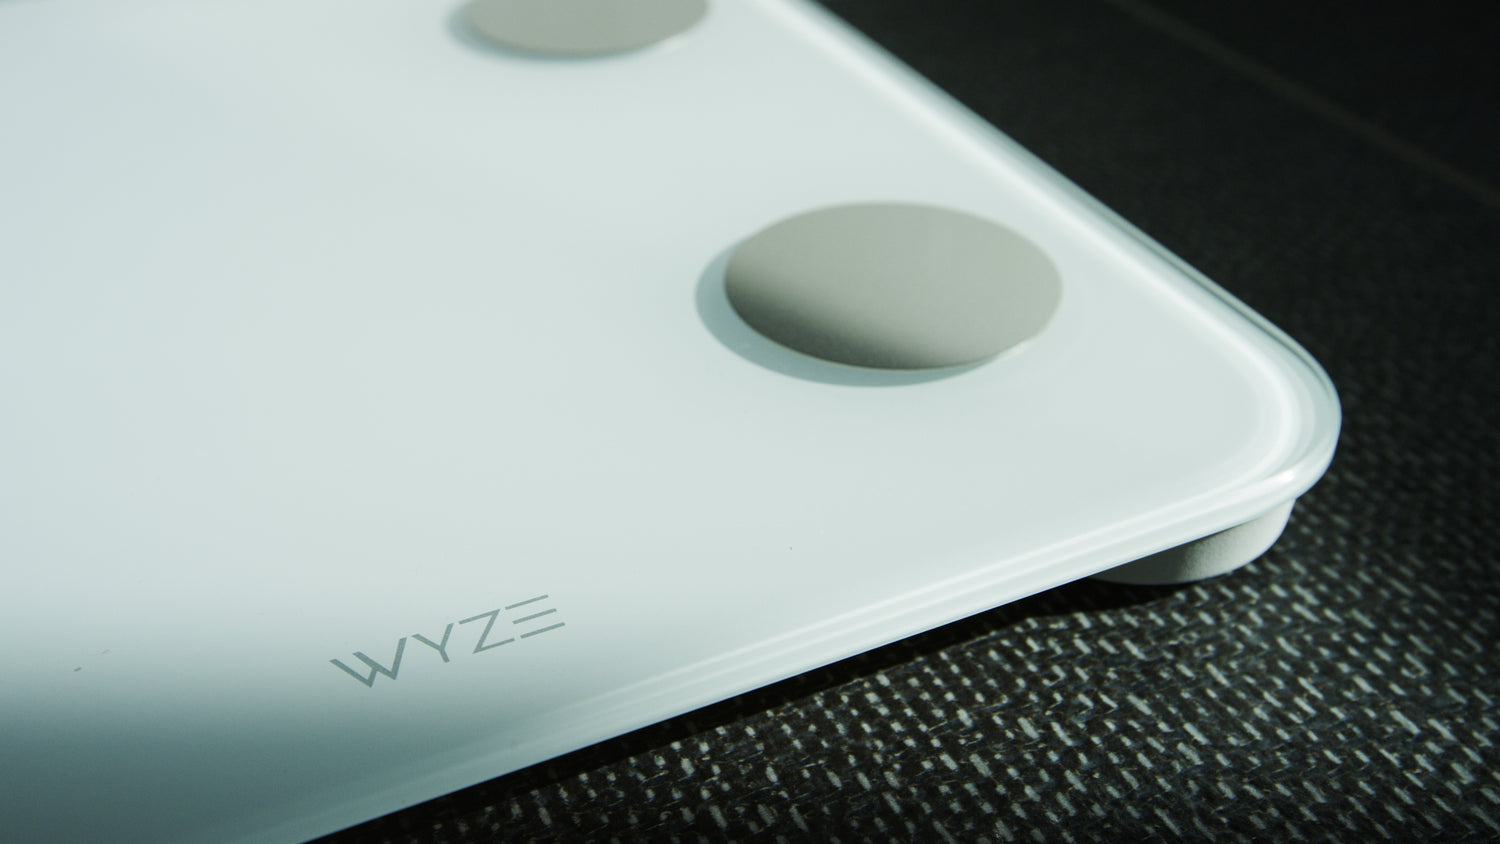 Close up view of White Wyze Scale S